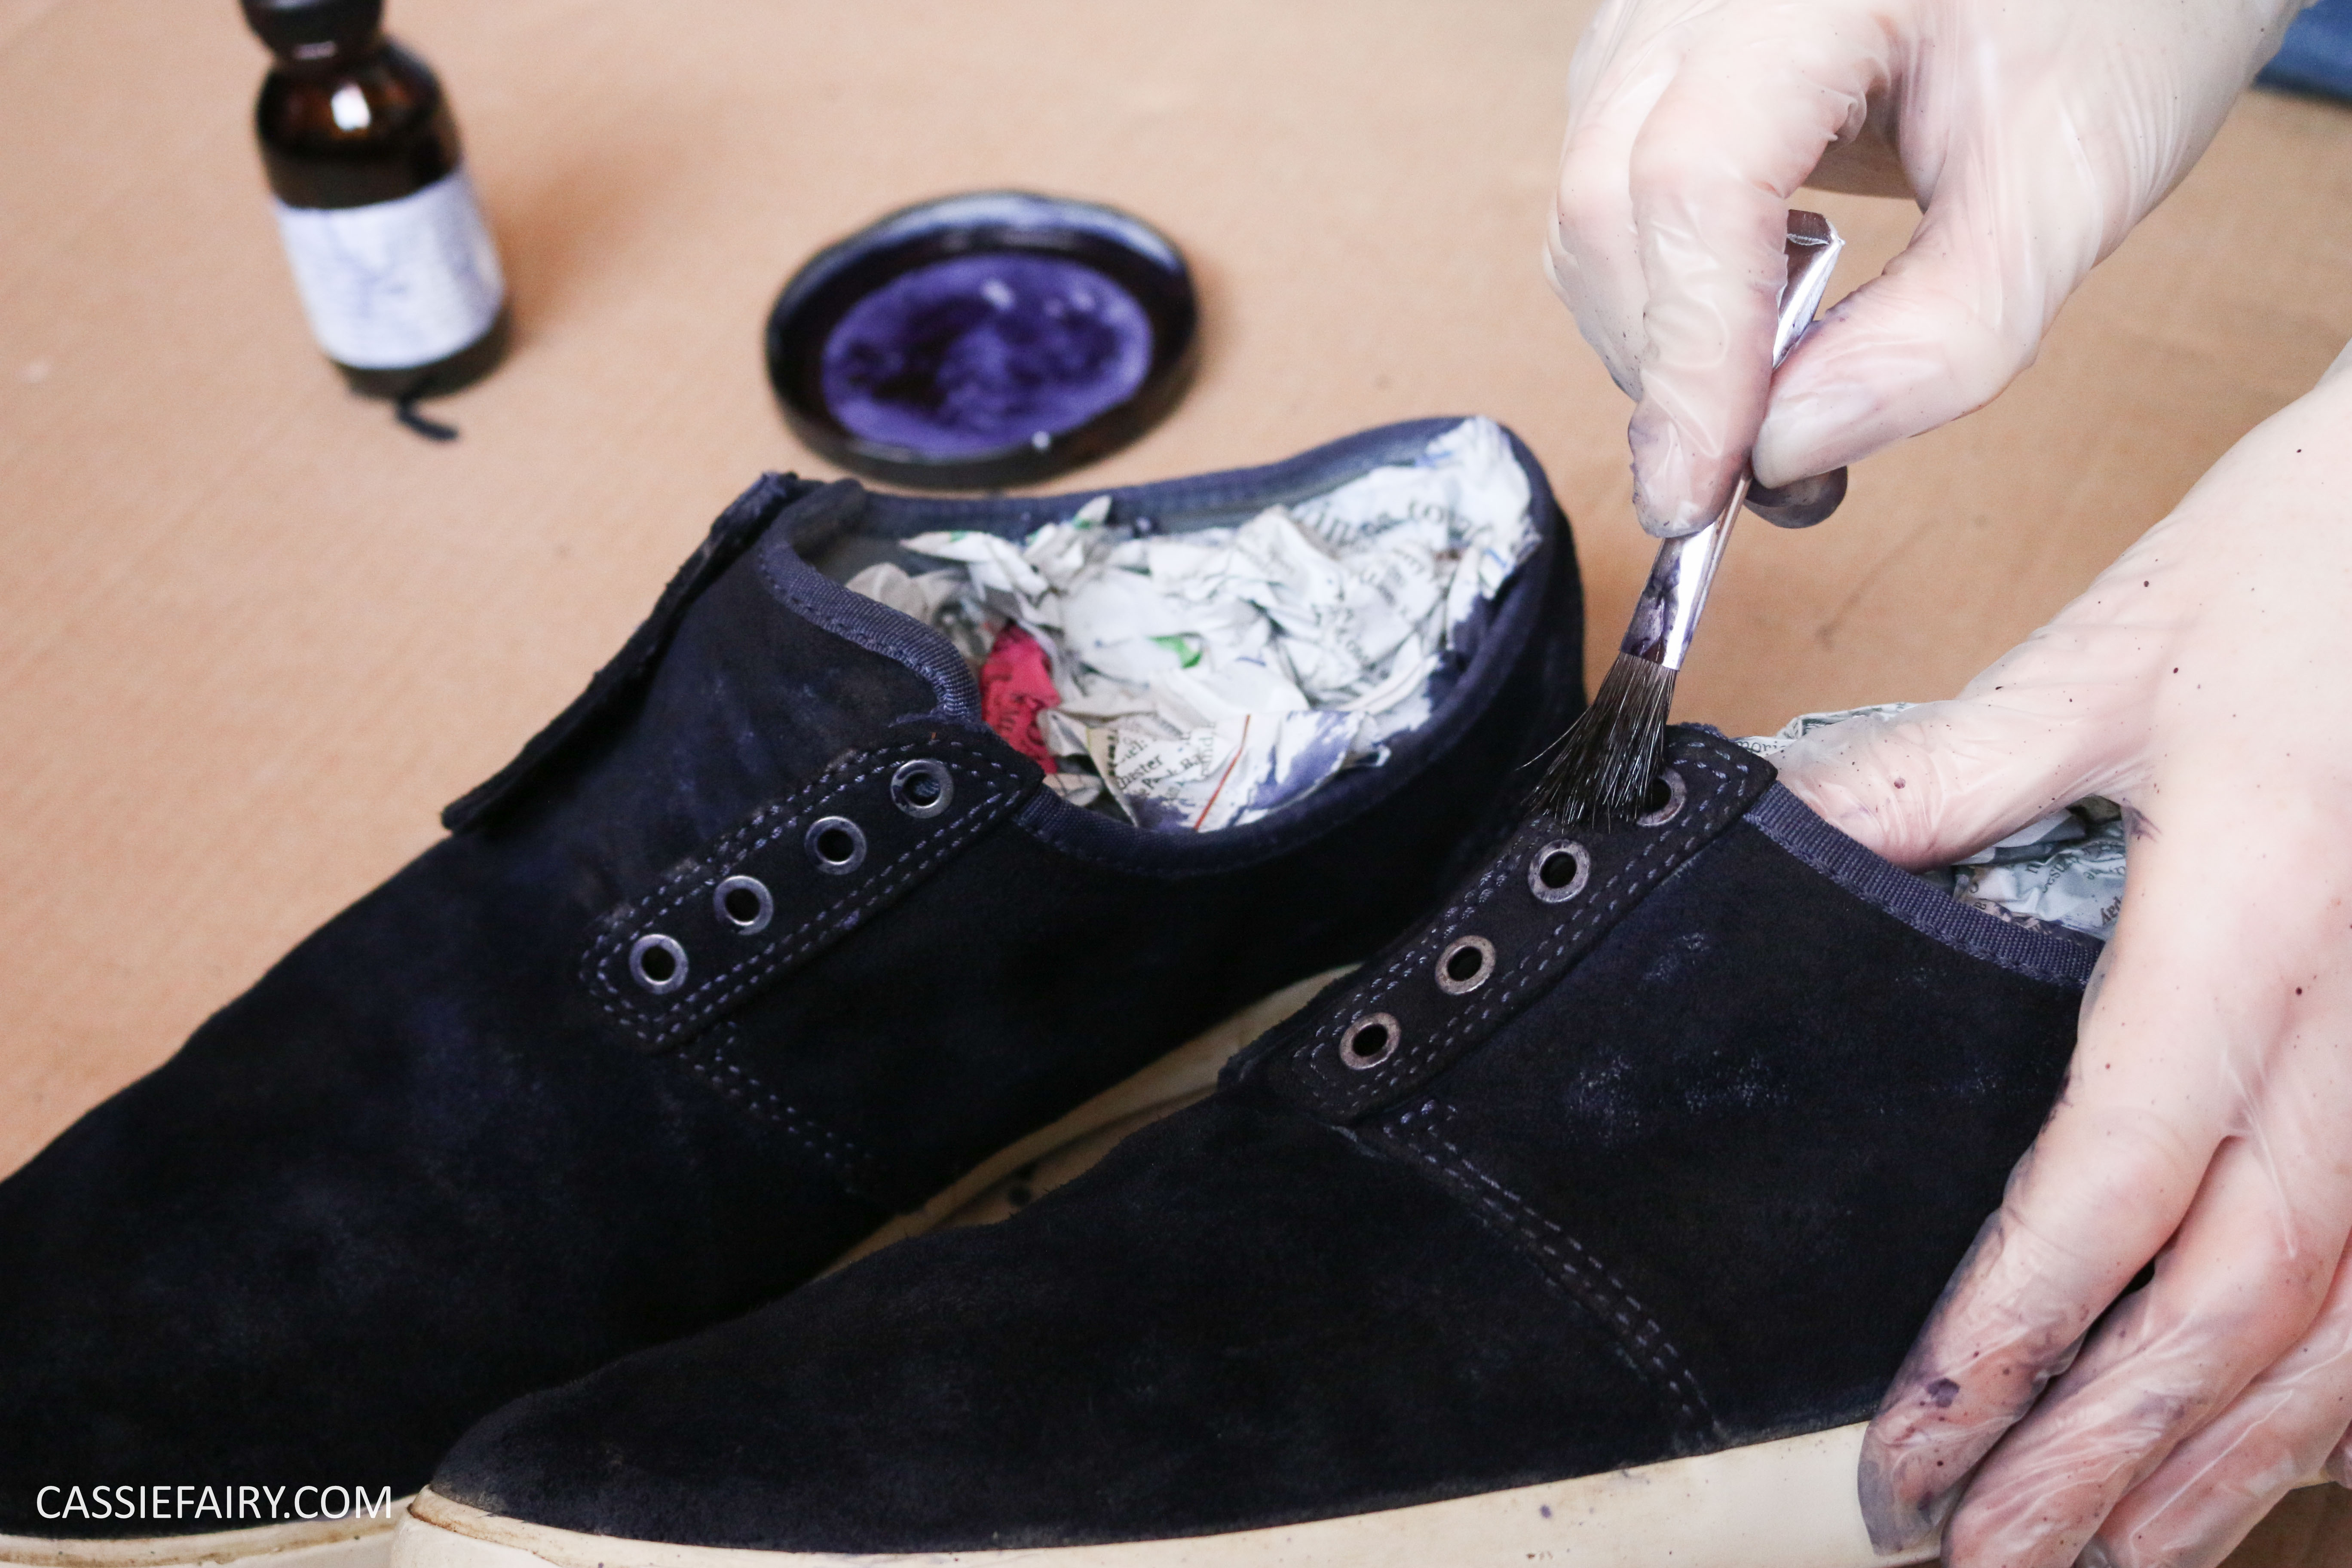 How to dye suede shoes tutorial ##suedeshoecare##bluesuedeshoes